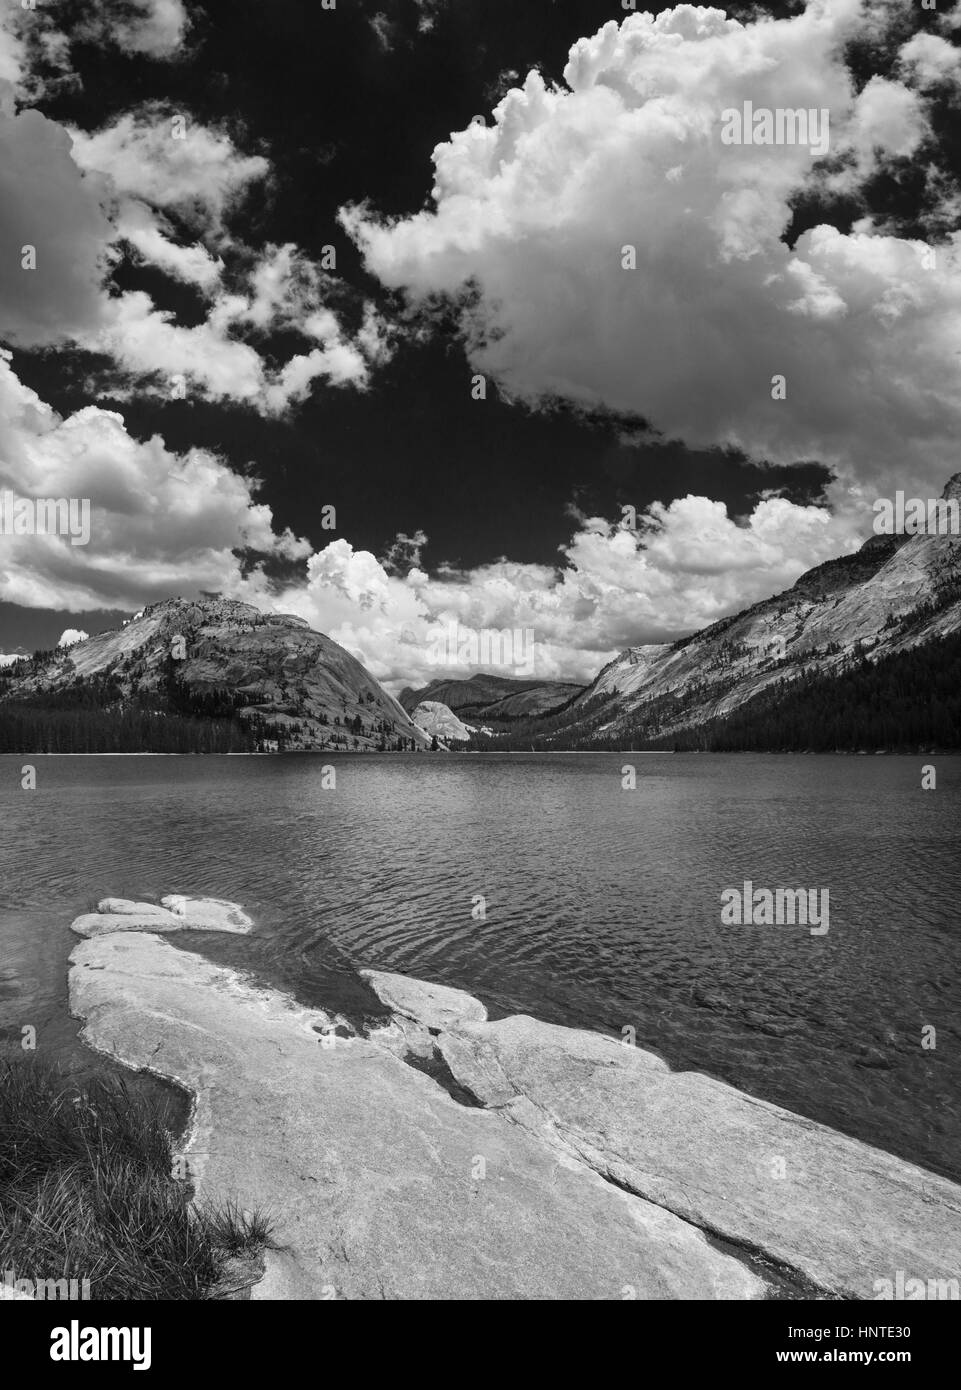 black and white image of Tenaya Lake in the Yosemite National Park high country with foreground rock slab and white clouds in the sky Stock Photo